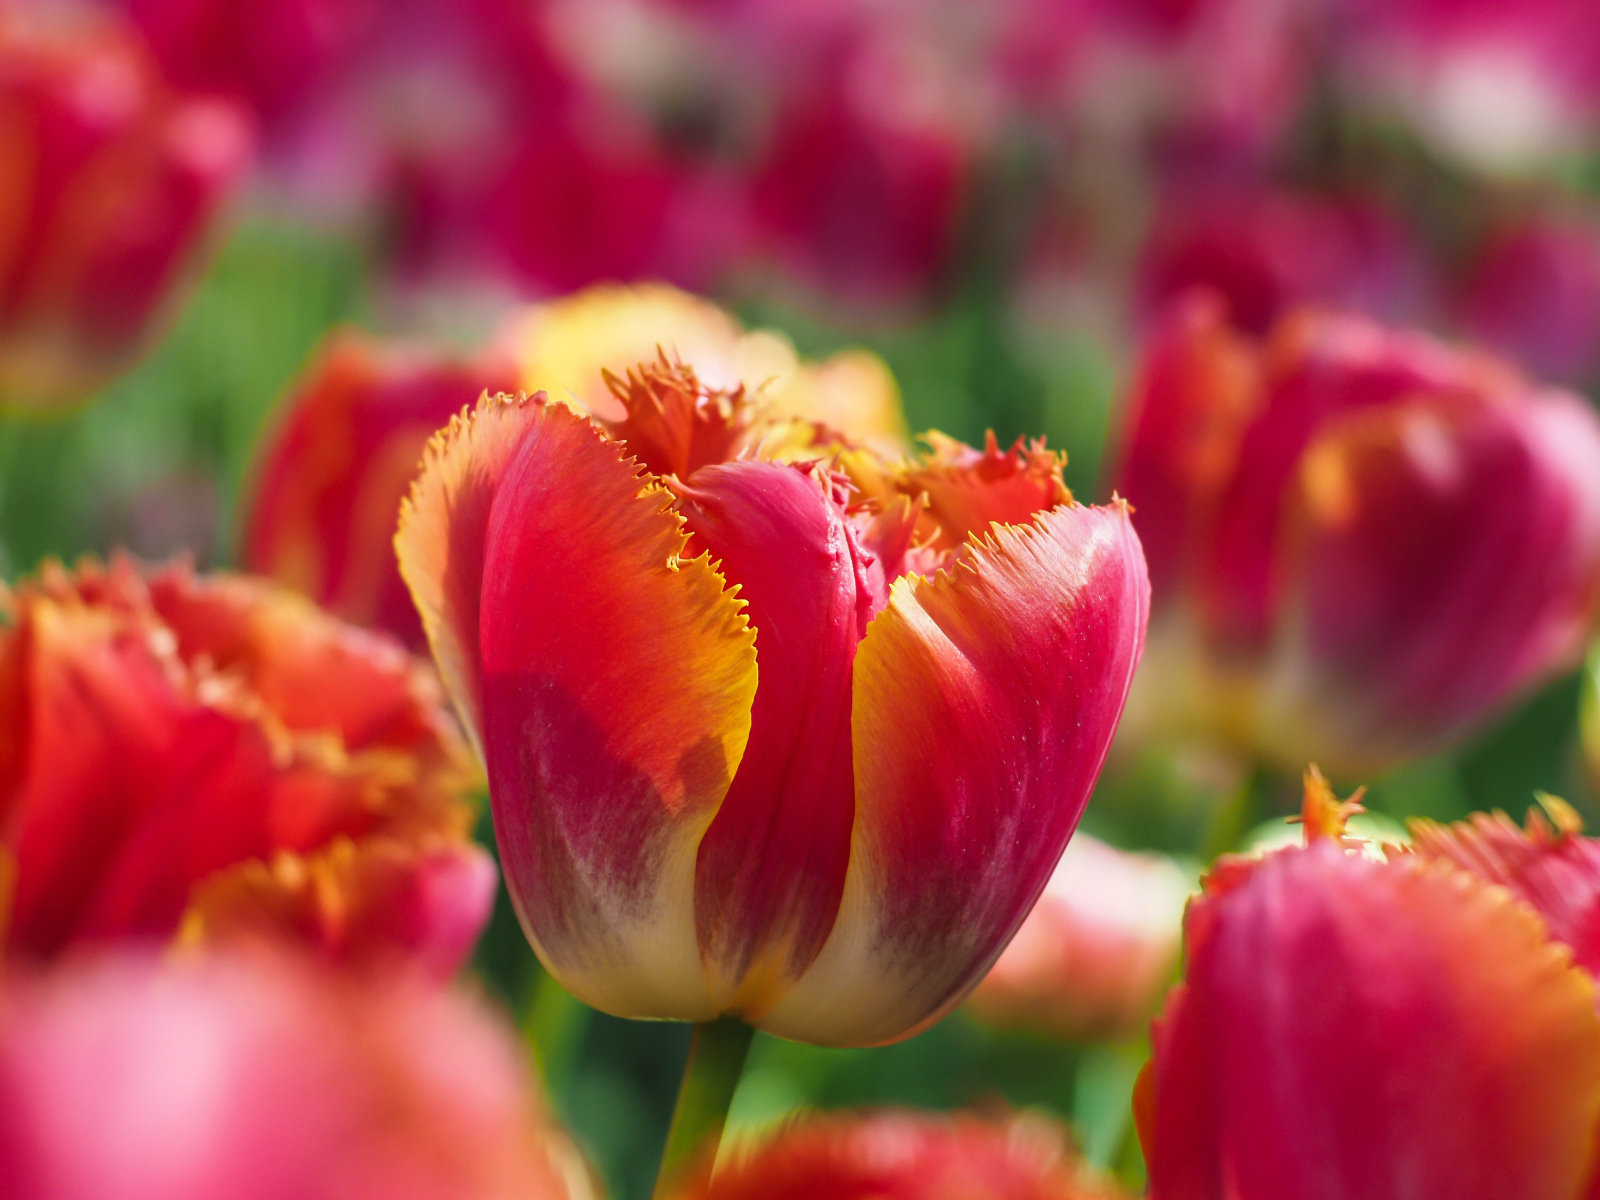 Bright red tulip with wavy petals in the flowerbed